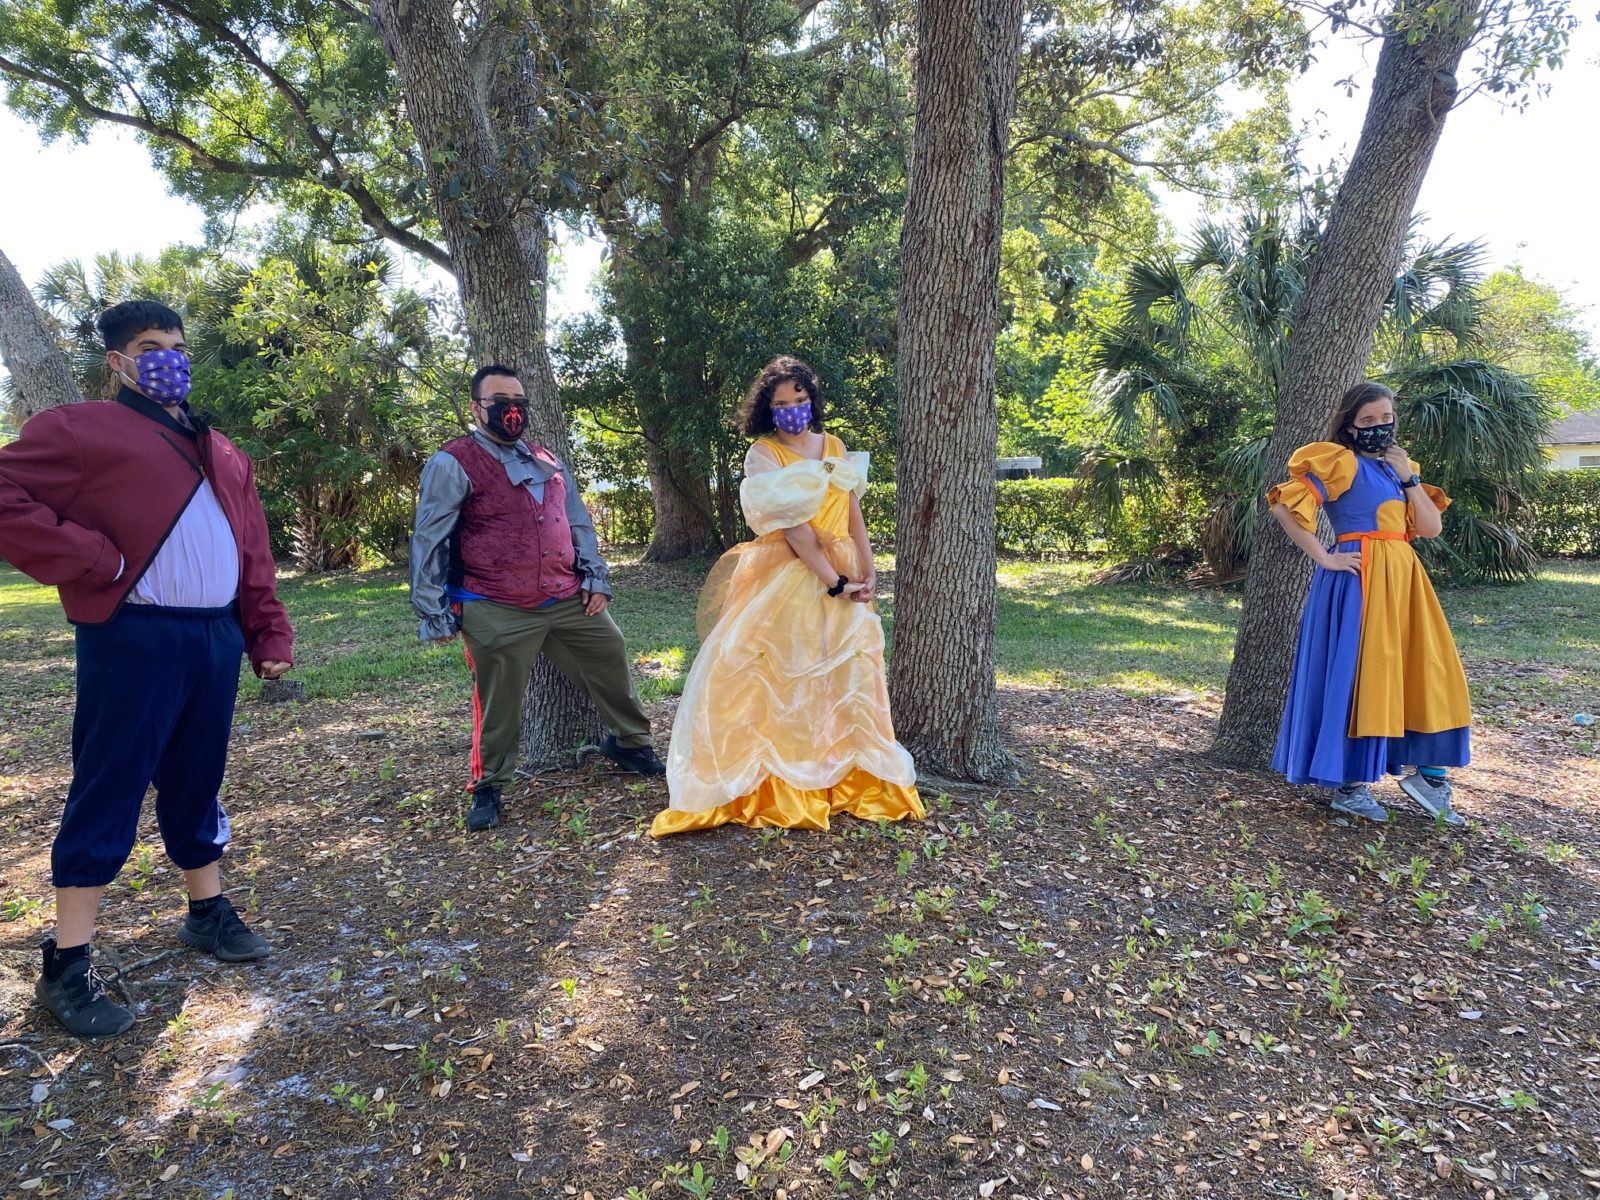 Image shows four actors dressed up as members of the Beauty and the Best cast standing outside in front of trees.